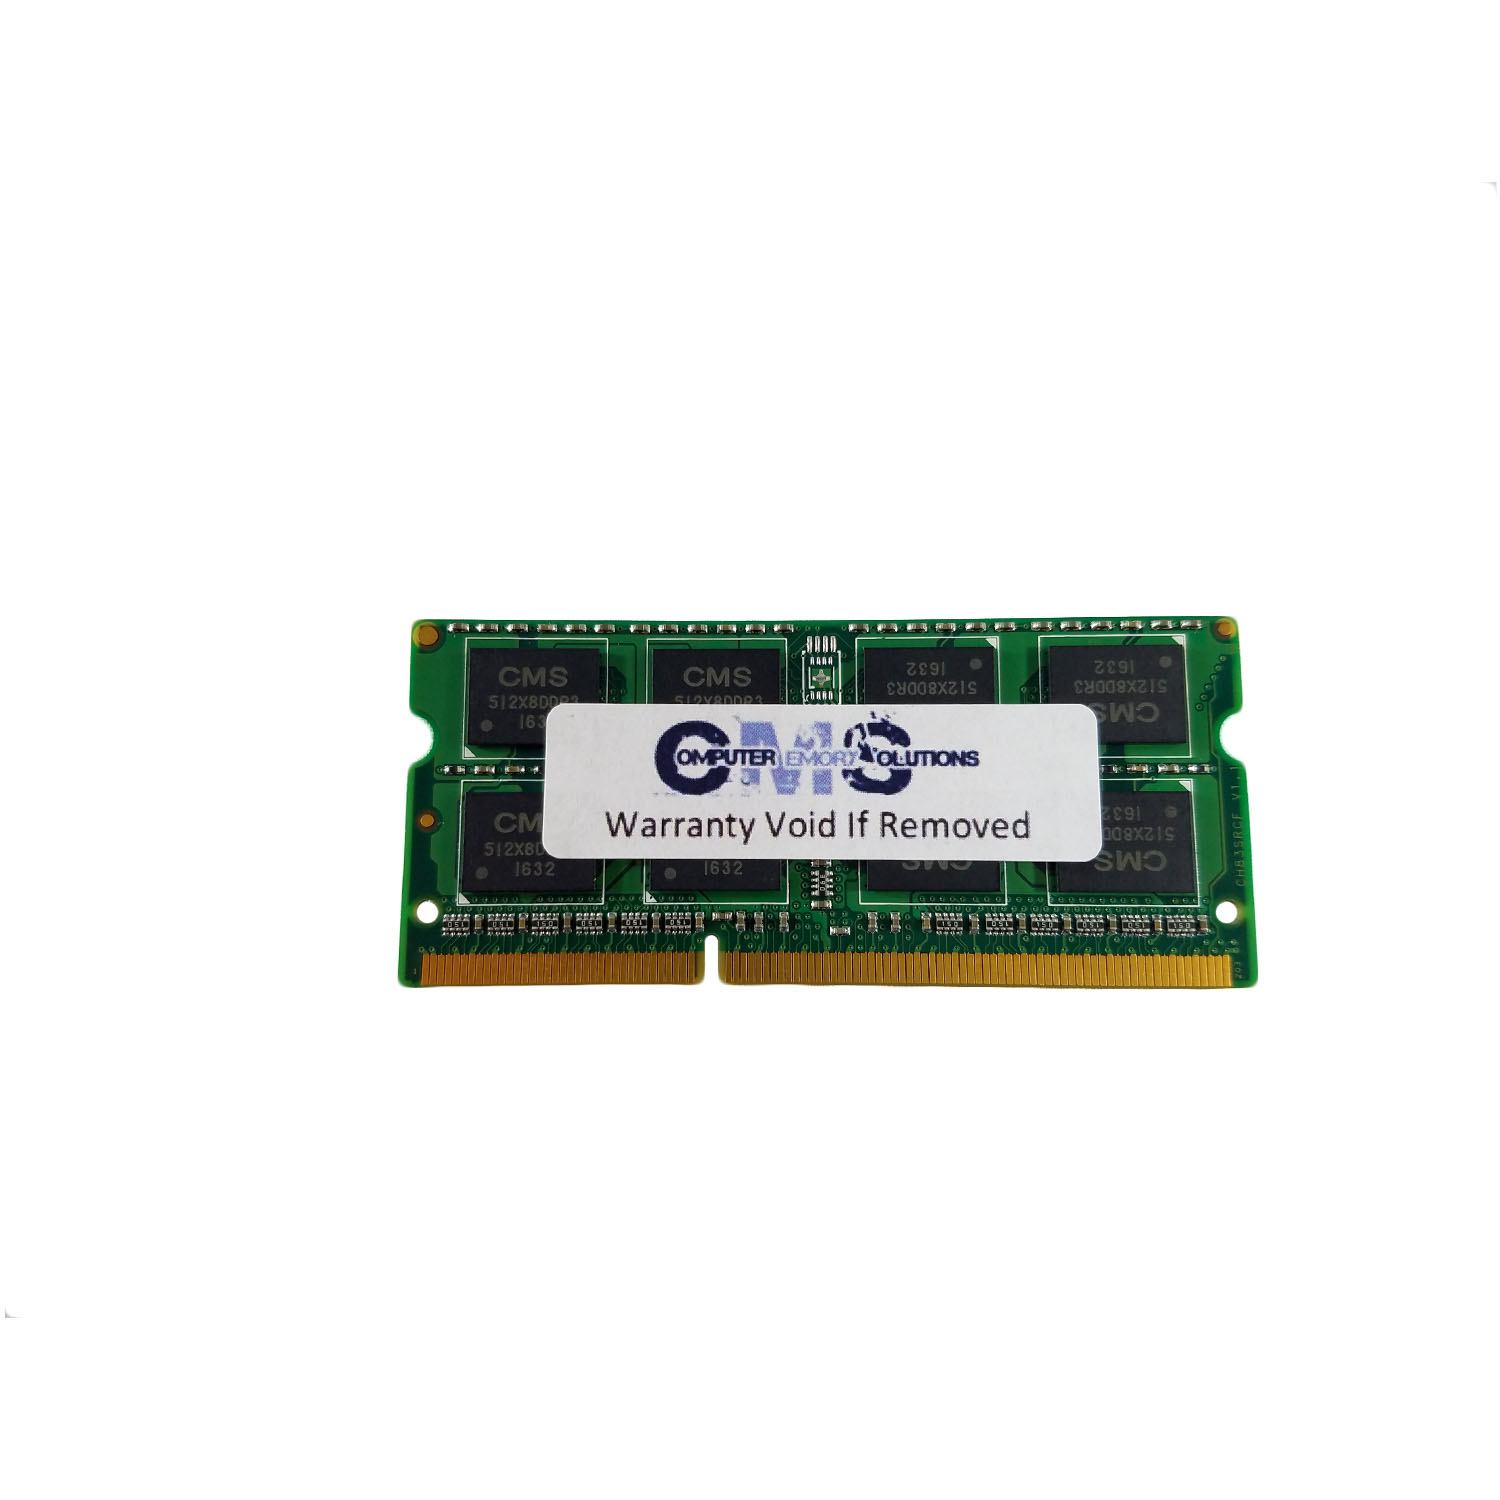 CMS 4GB (1X4GB) DDR3 10600 1333MHZ NON ECC SODIMM Memory Ram Compatible with Panasonic Toughbook Cf-53, Cf-53A, Cf-53C - A30 - image 1 of 3